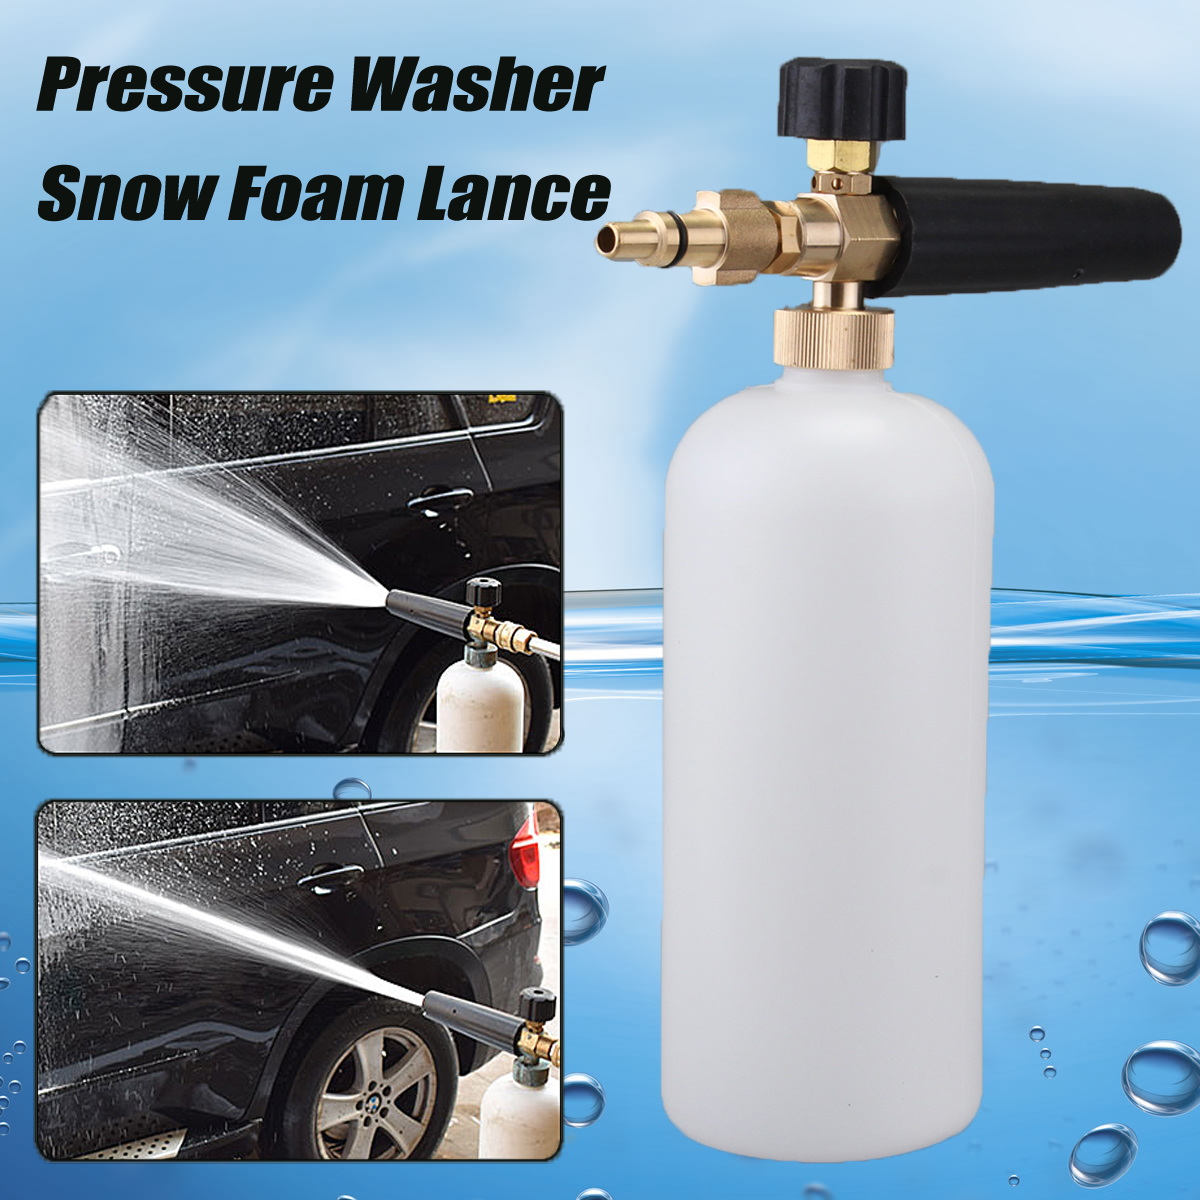 1L-Pressure-Washer-Snow-Foam-Lance-Jet-Car-Washer-for-Driveways-Roofs-Siding-Cars-1541307-1